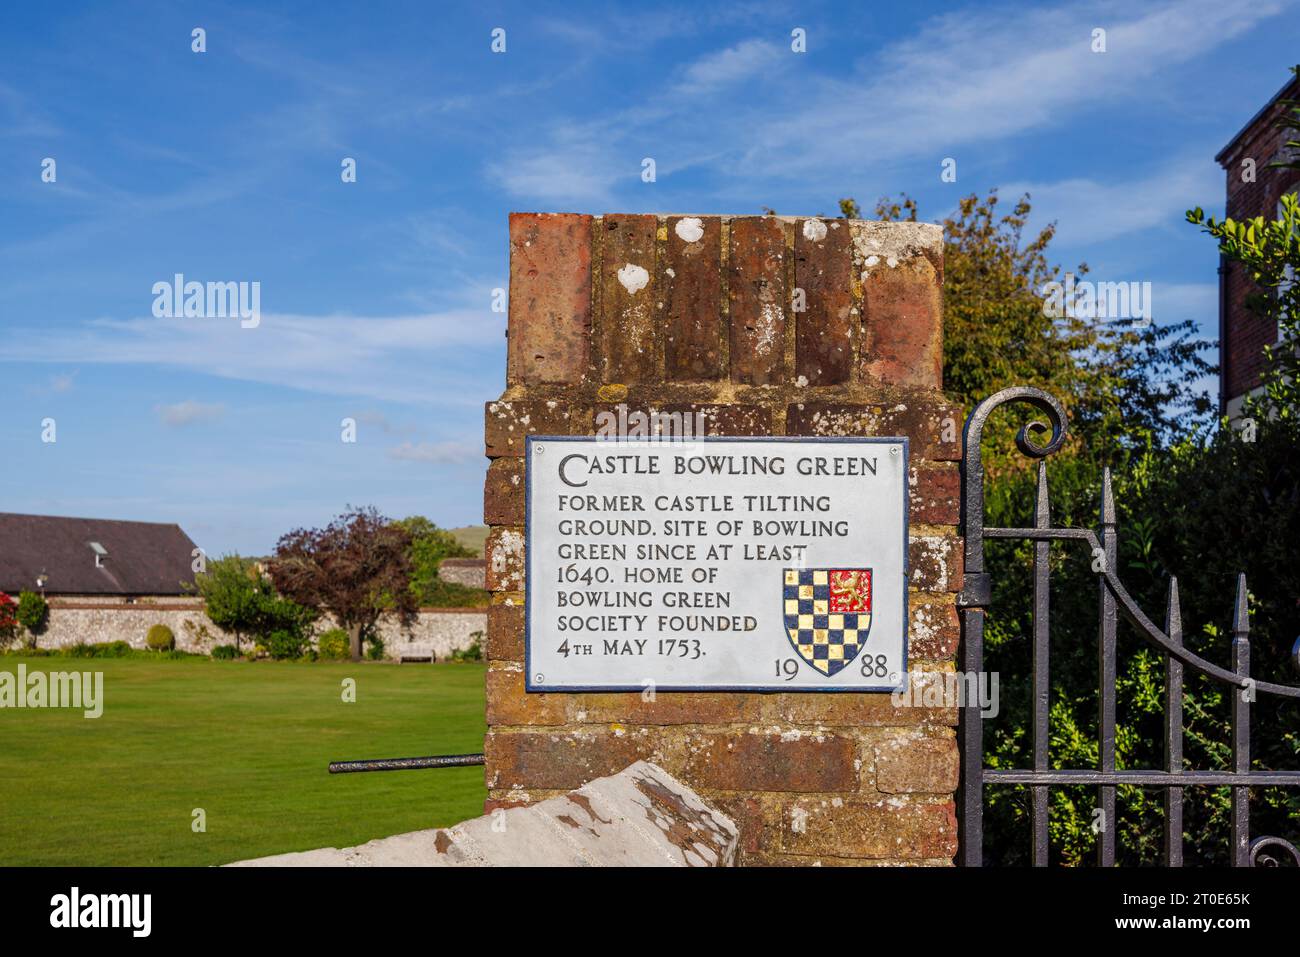 Sign at the Castle Bowling Green, the former Lewes Castle tilting ground, in Lewes, the historic county town of East Sussex, south-east England Stock Photo